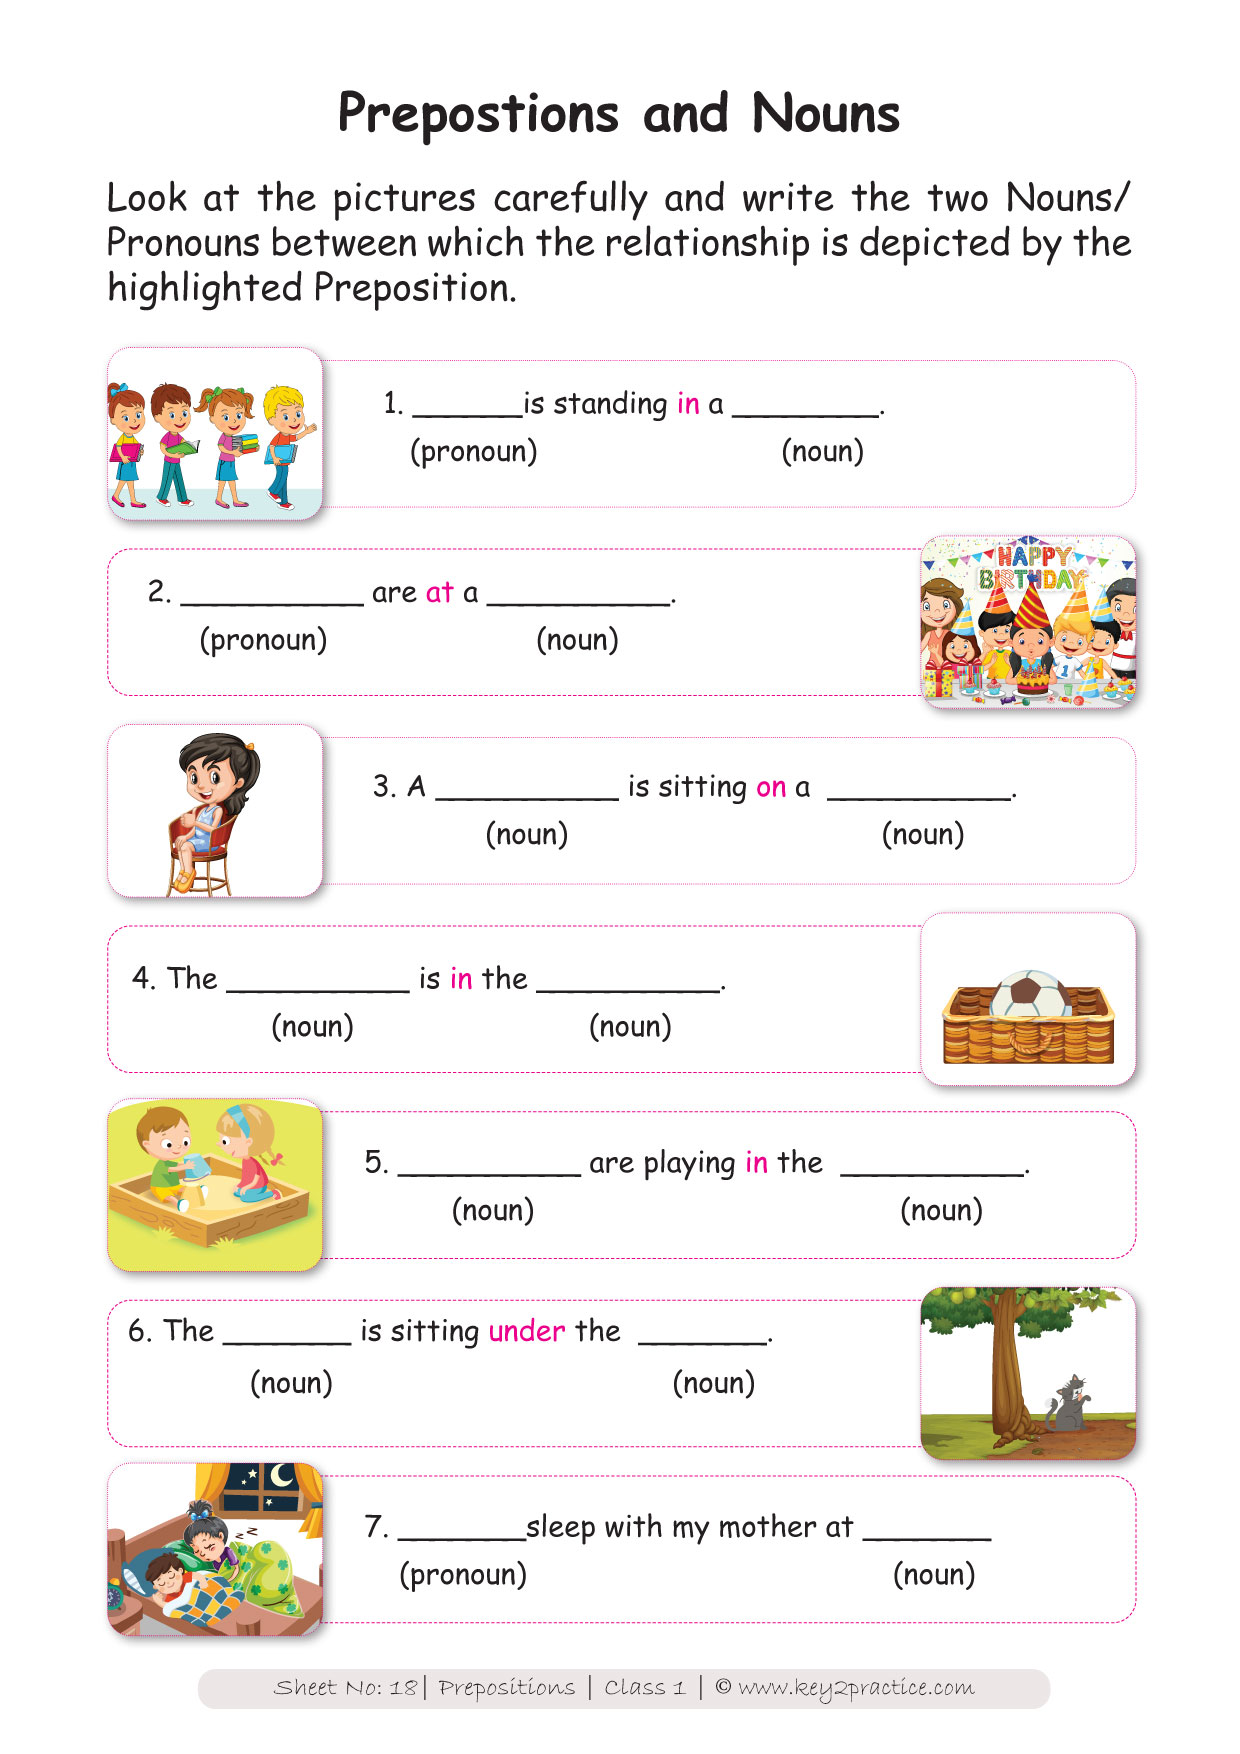 download-cbse-class-1-english-printable-worksheet-2020-session-easy-worksheets-grade-1-english